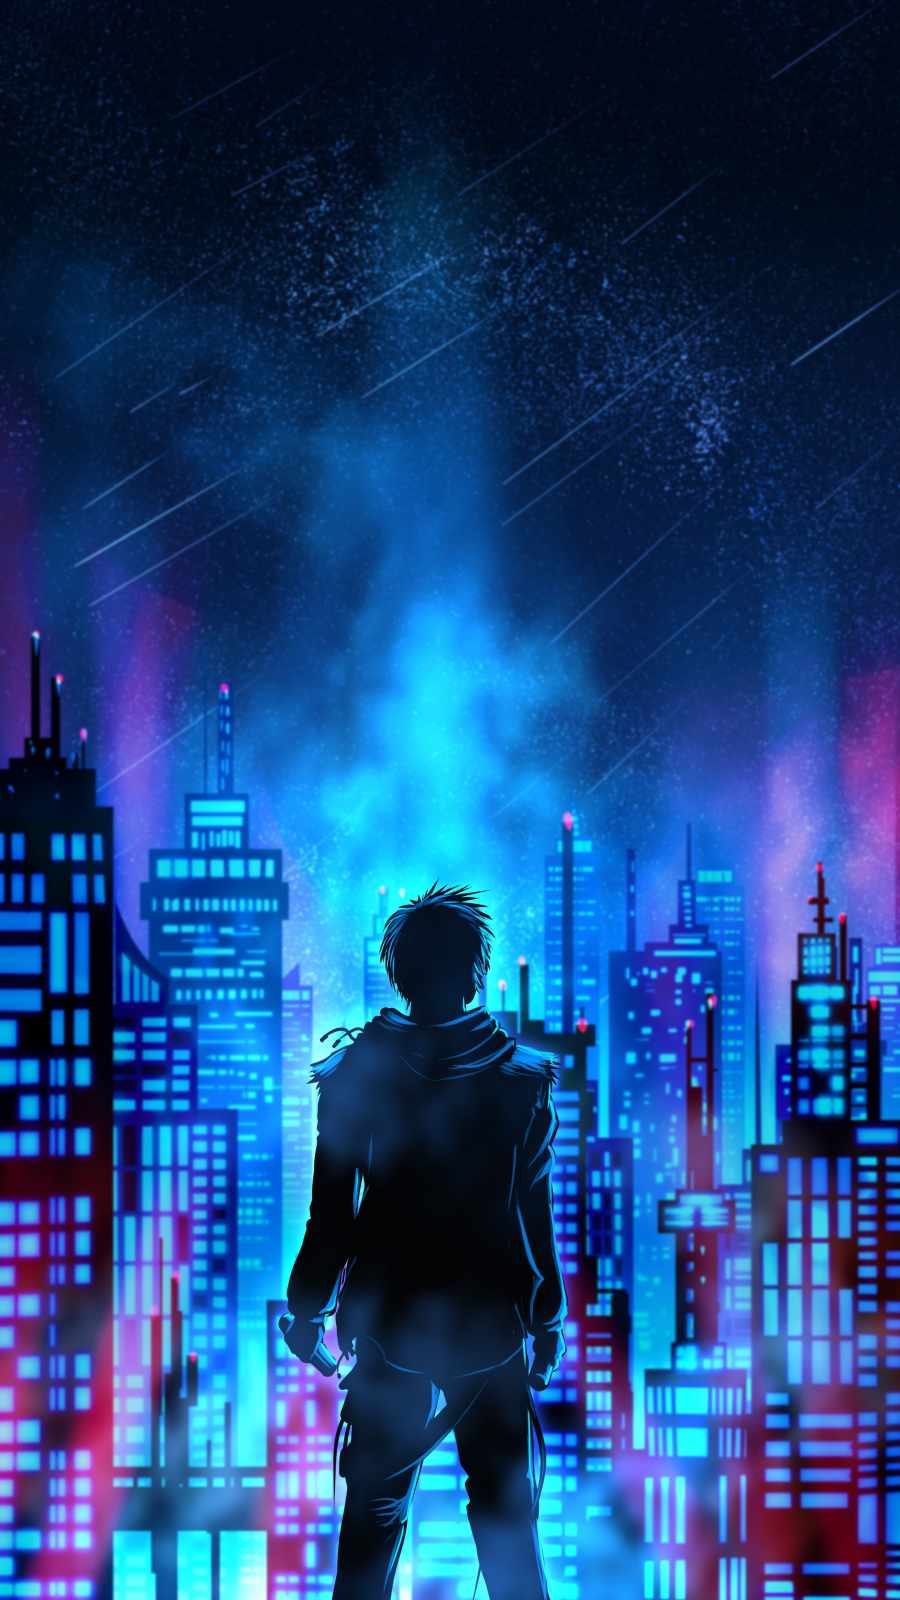 Alone in City iPhone Wallpaper